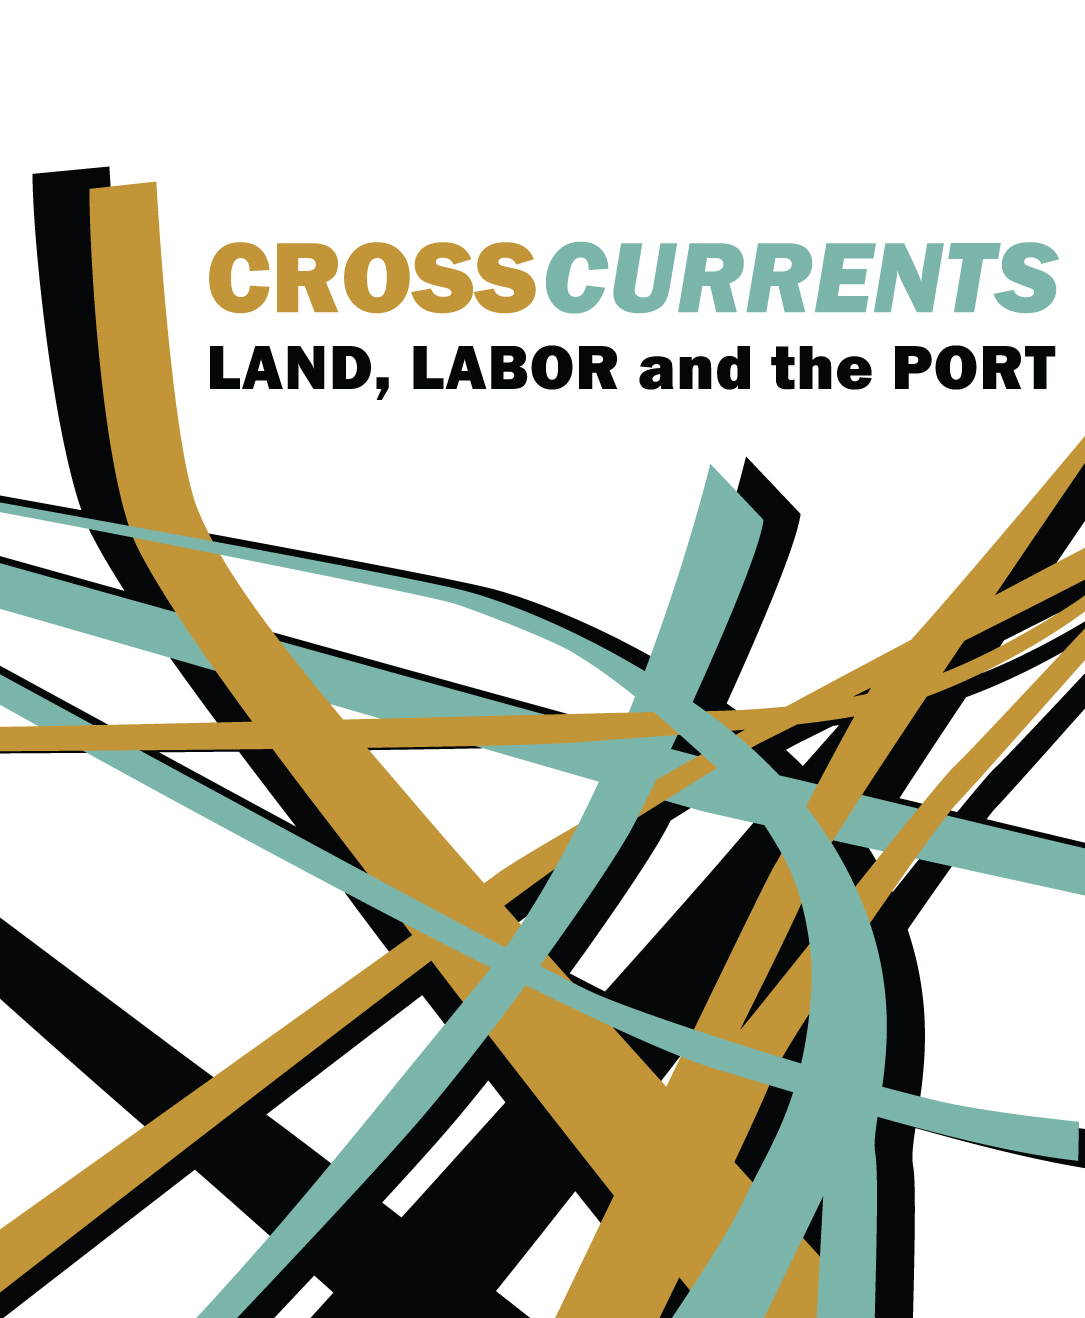 Crosscurrents: Land, Labor and the Port.